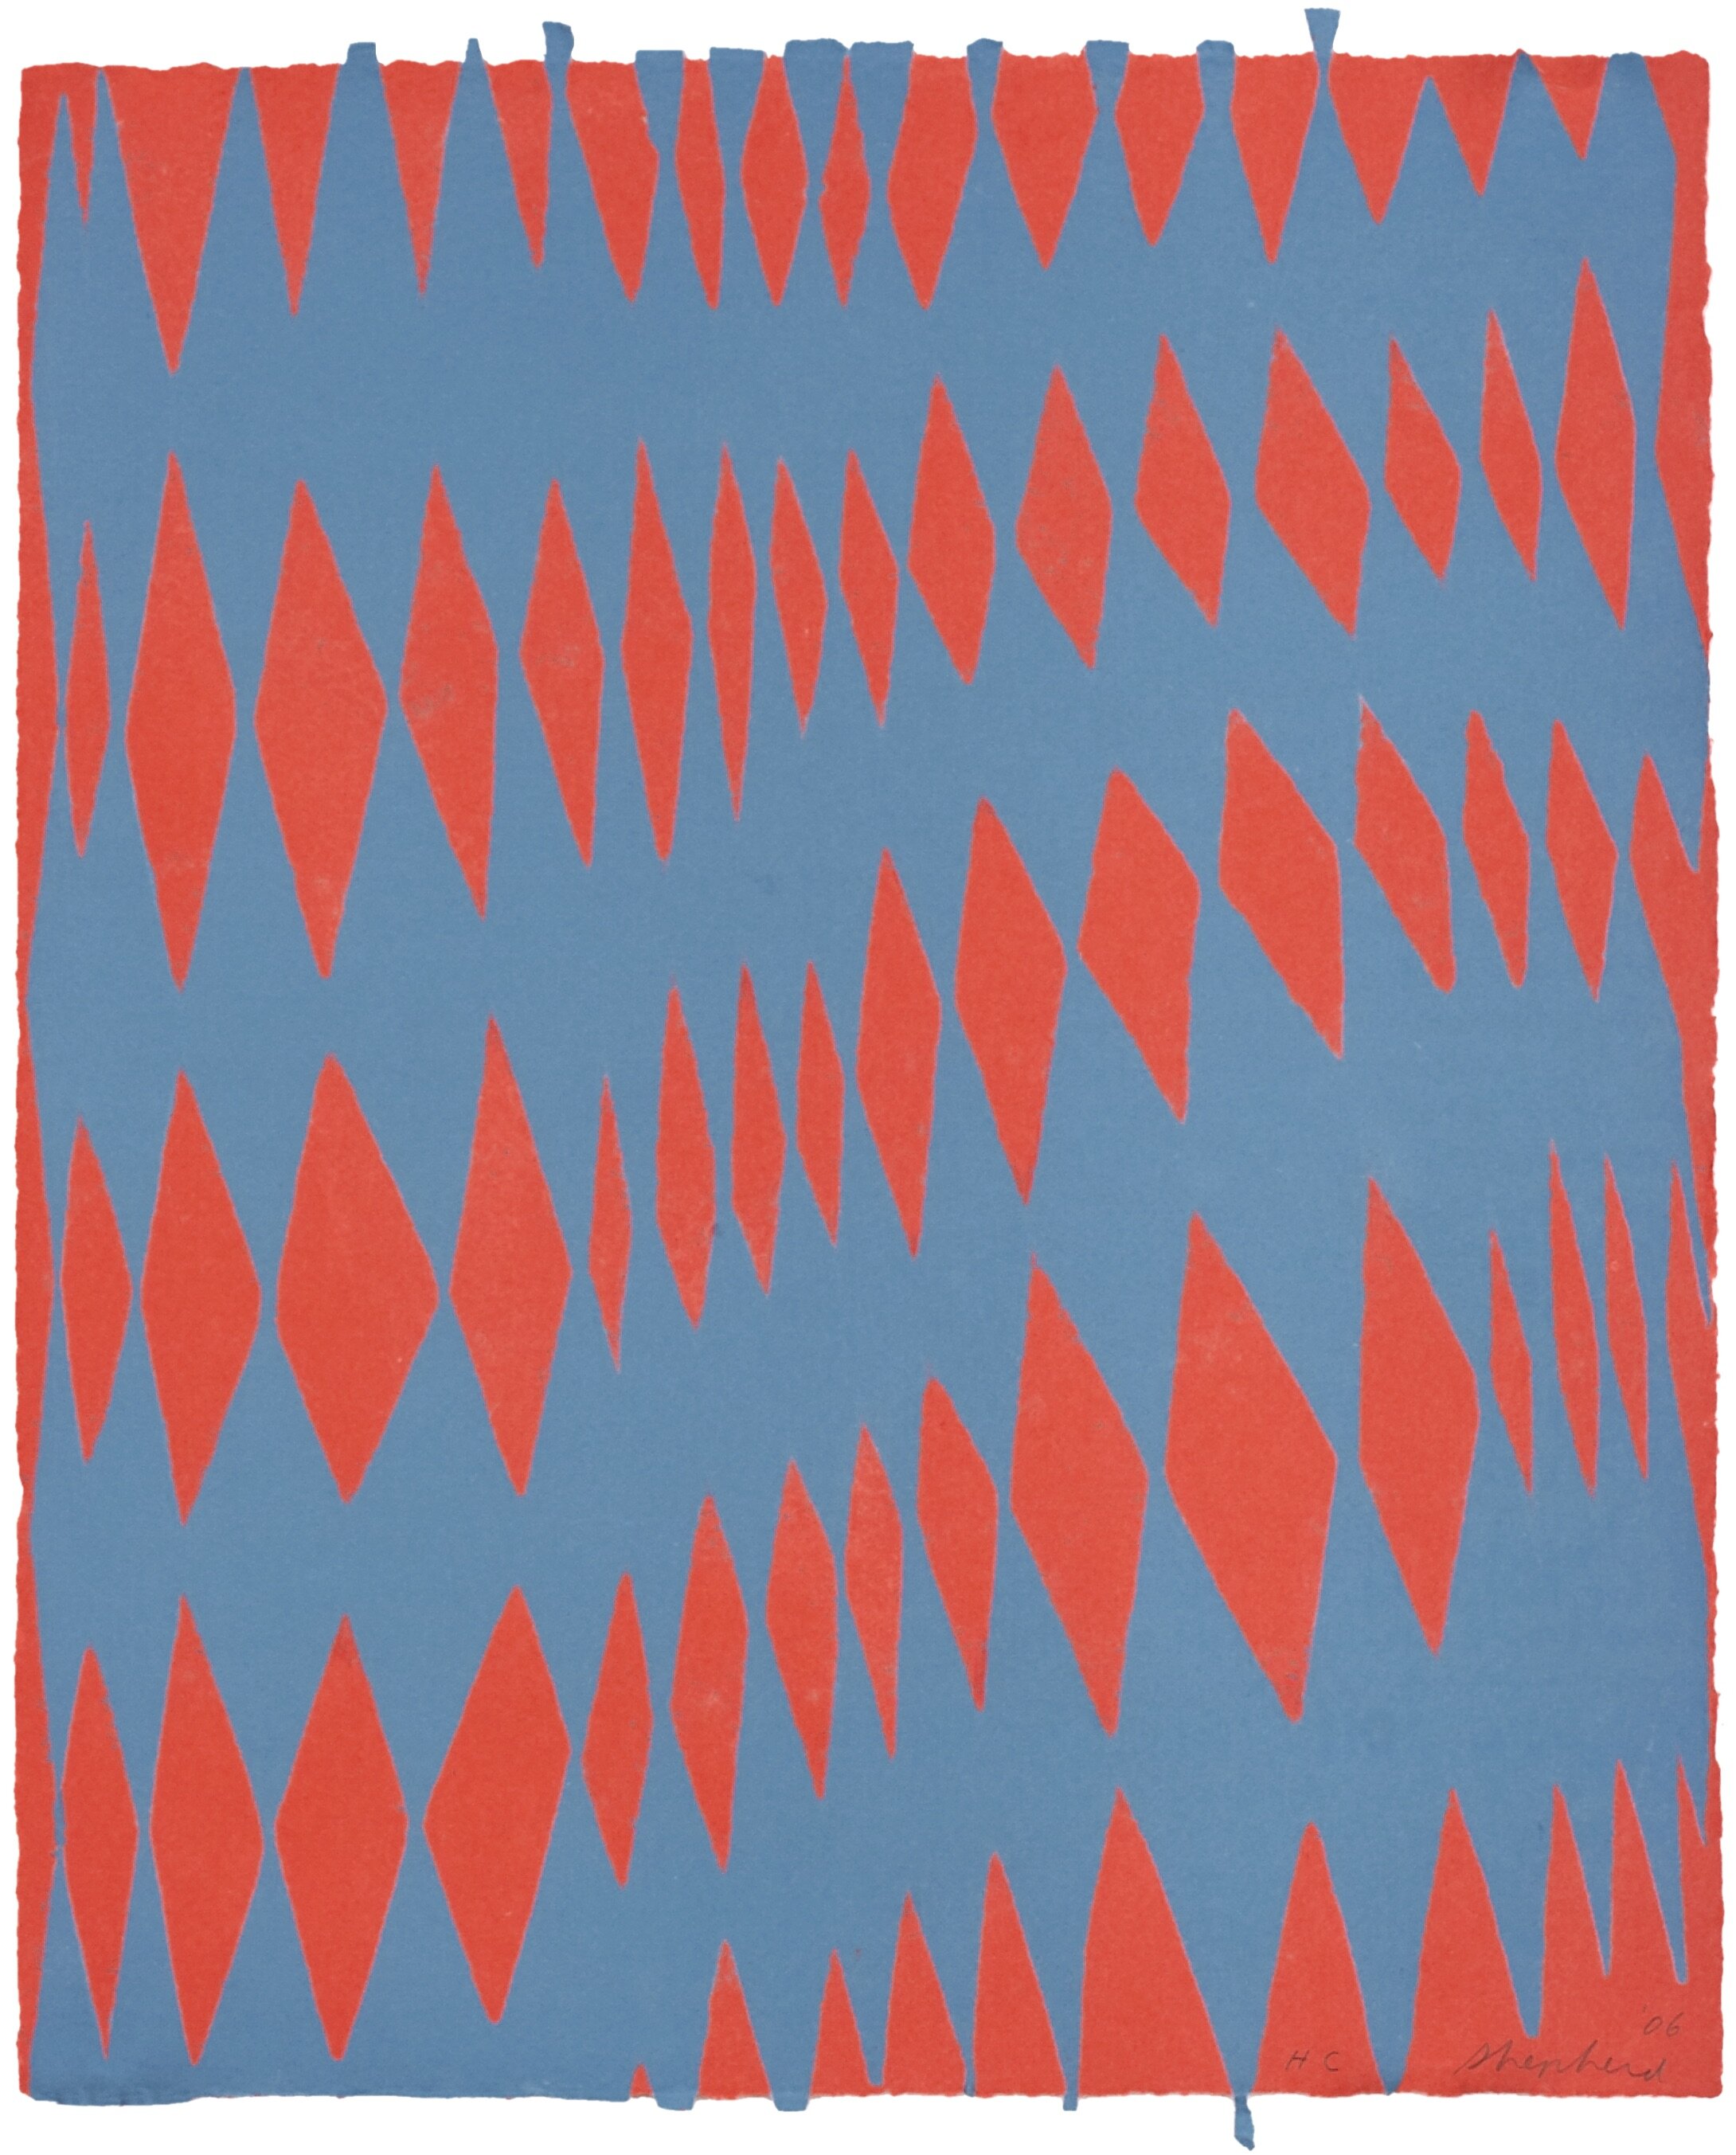  Kate Shepherd,  Rondeau,  2006, Pigmented linen blowout on pigmented linen-cotton base sheet, 15.5 x 12.5 inches. 